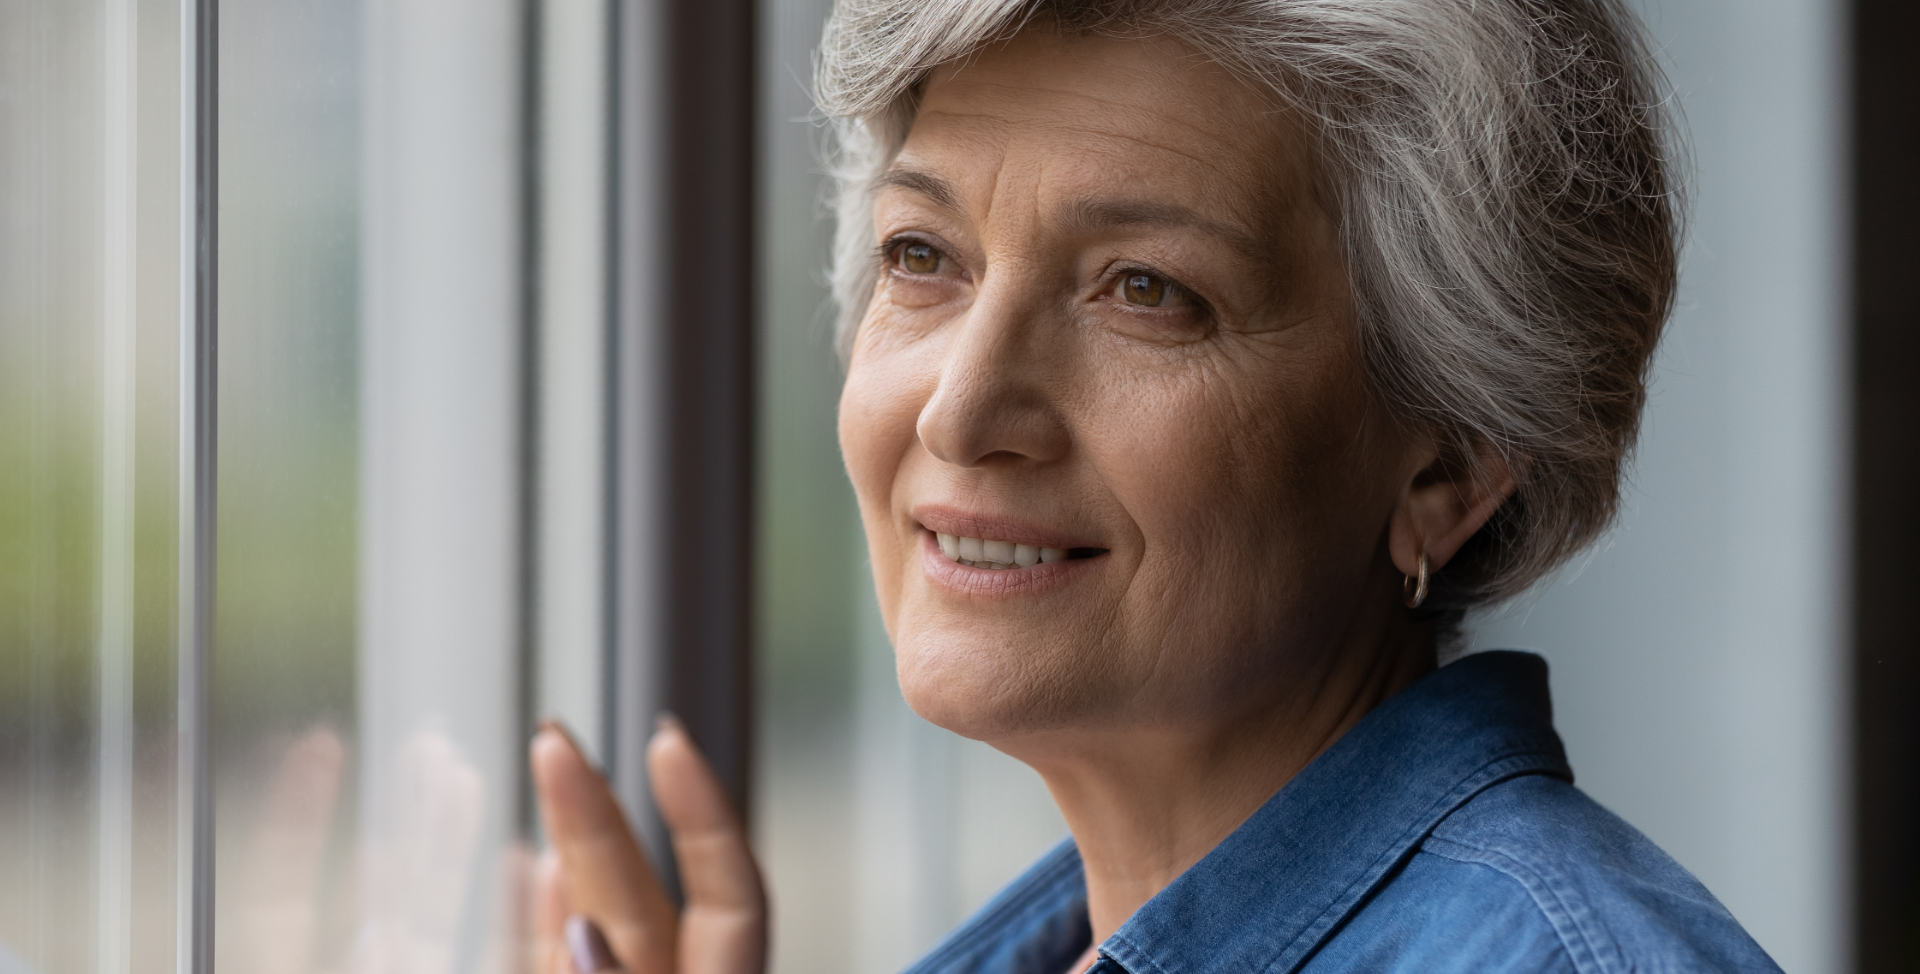 Woman looking out window and smiling